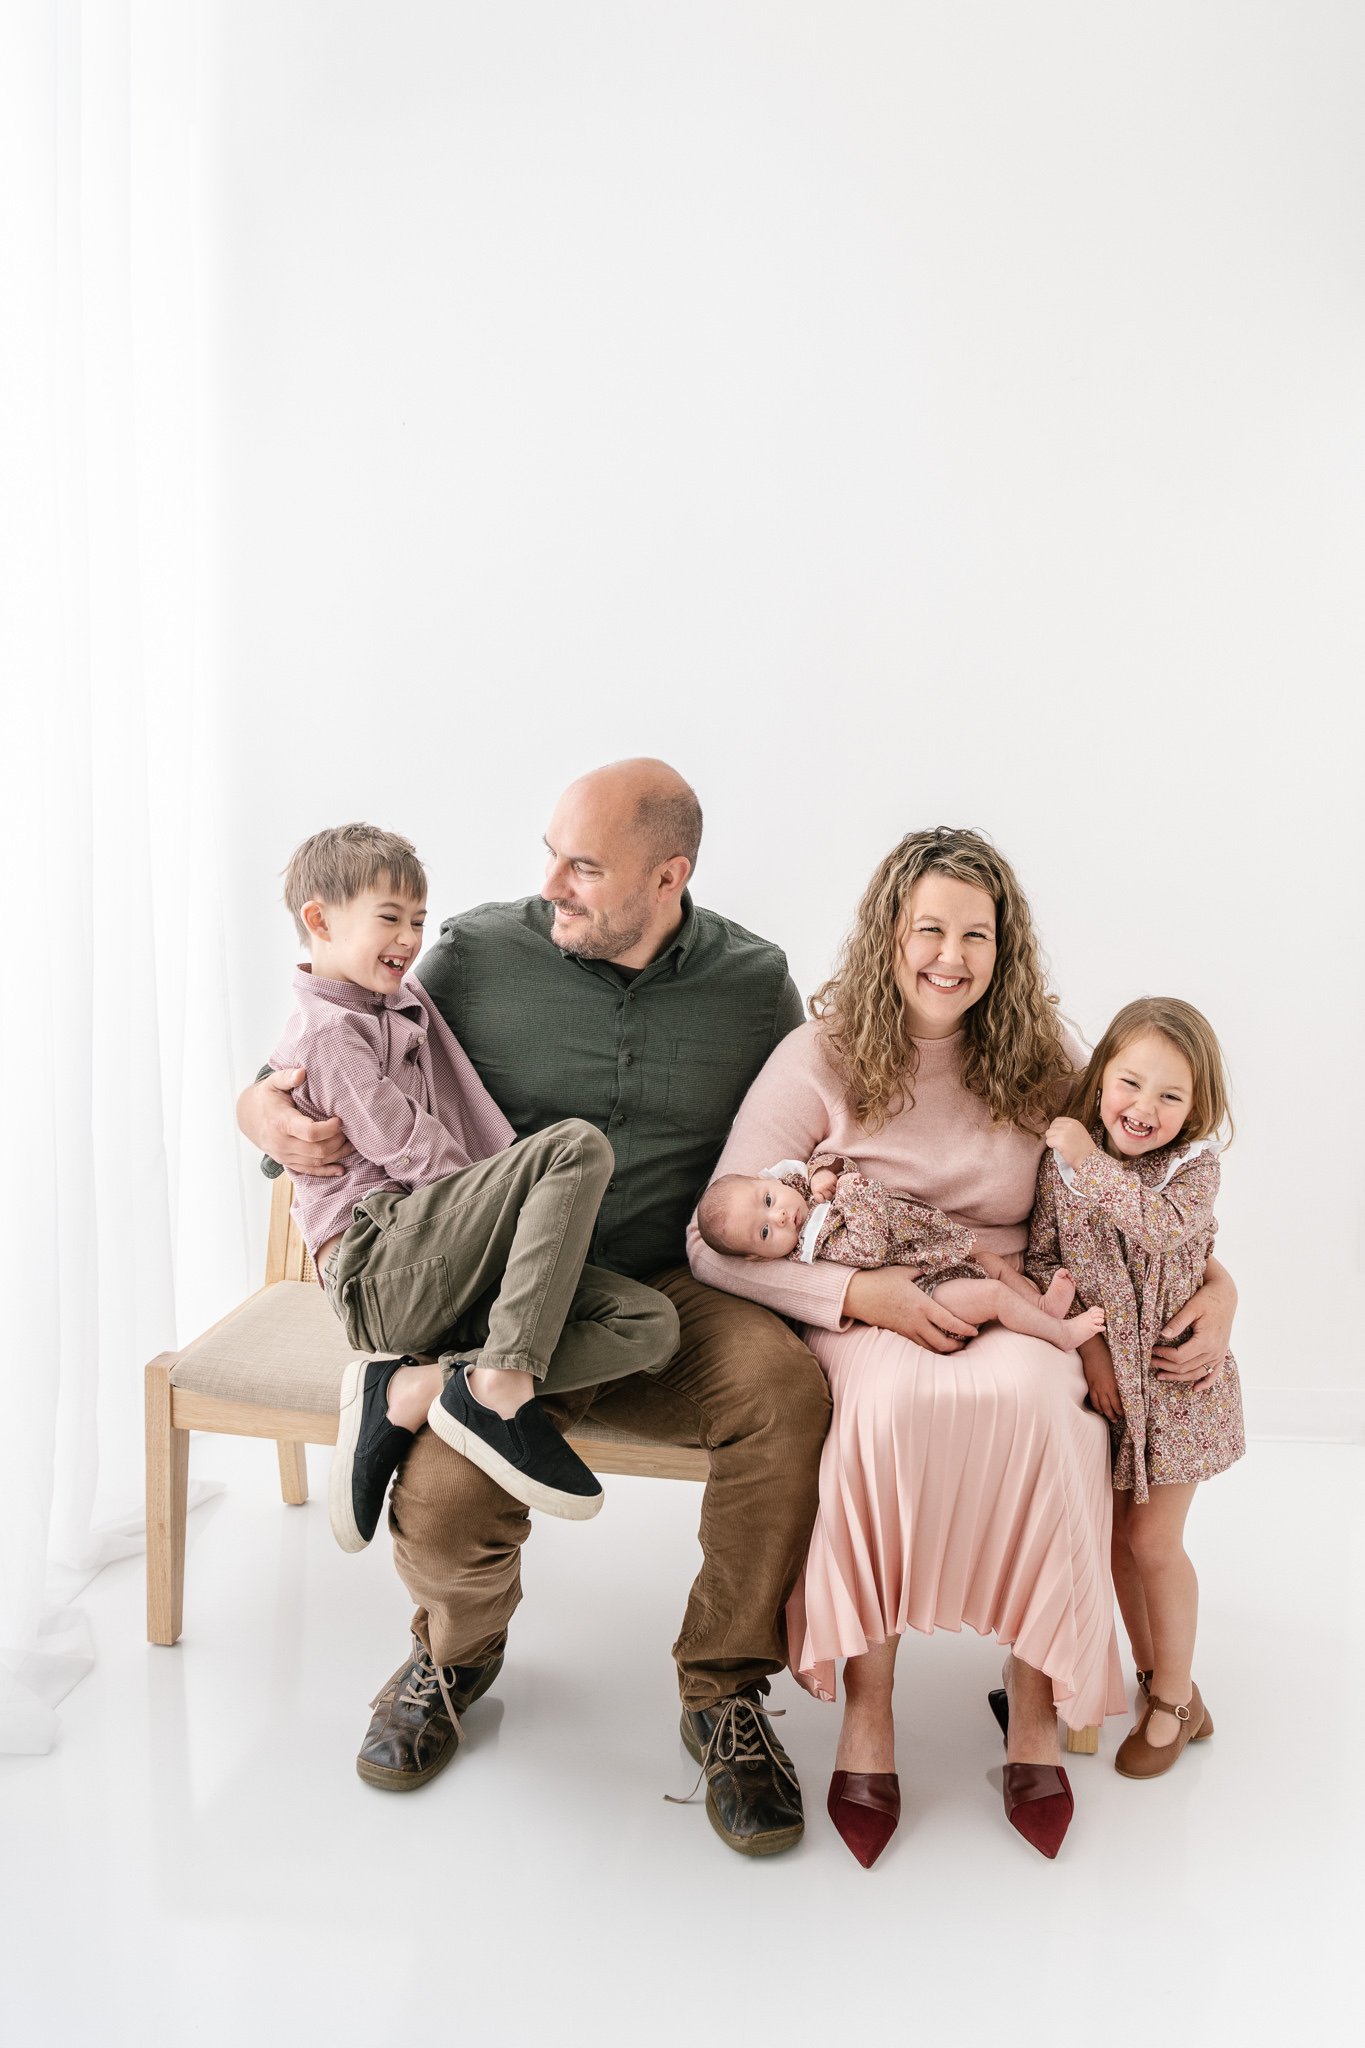  Nicole Hawkins Photography captures a family portrait in a white studio with each kid's personality shine. personality portraits #NicoleHawkinsPhotography #NicoleHawkinsFamily #Newborns #MaplewoodNJ #studiofamilyportraits #modernfamilyportraits 